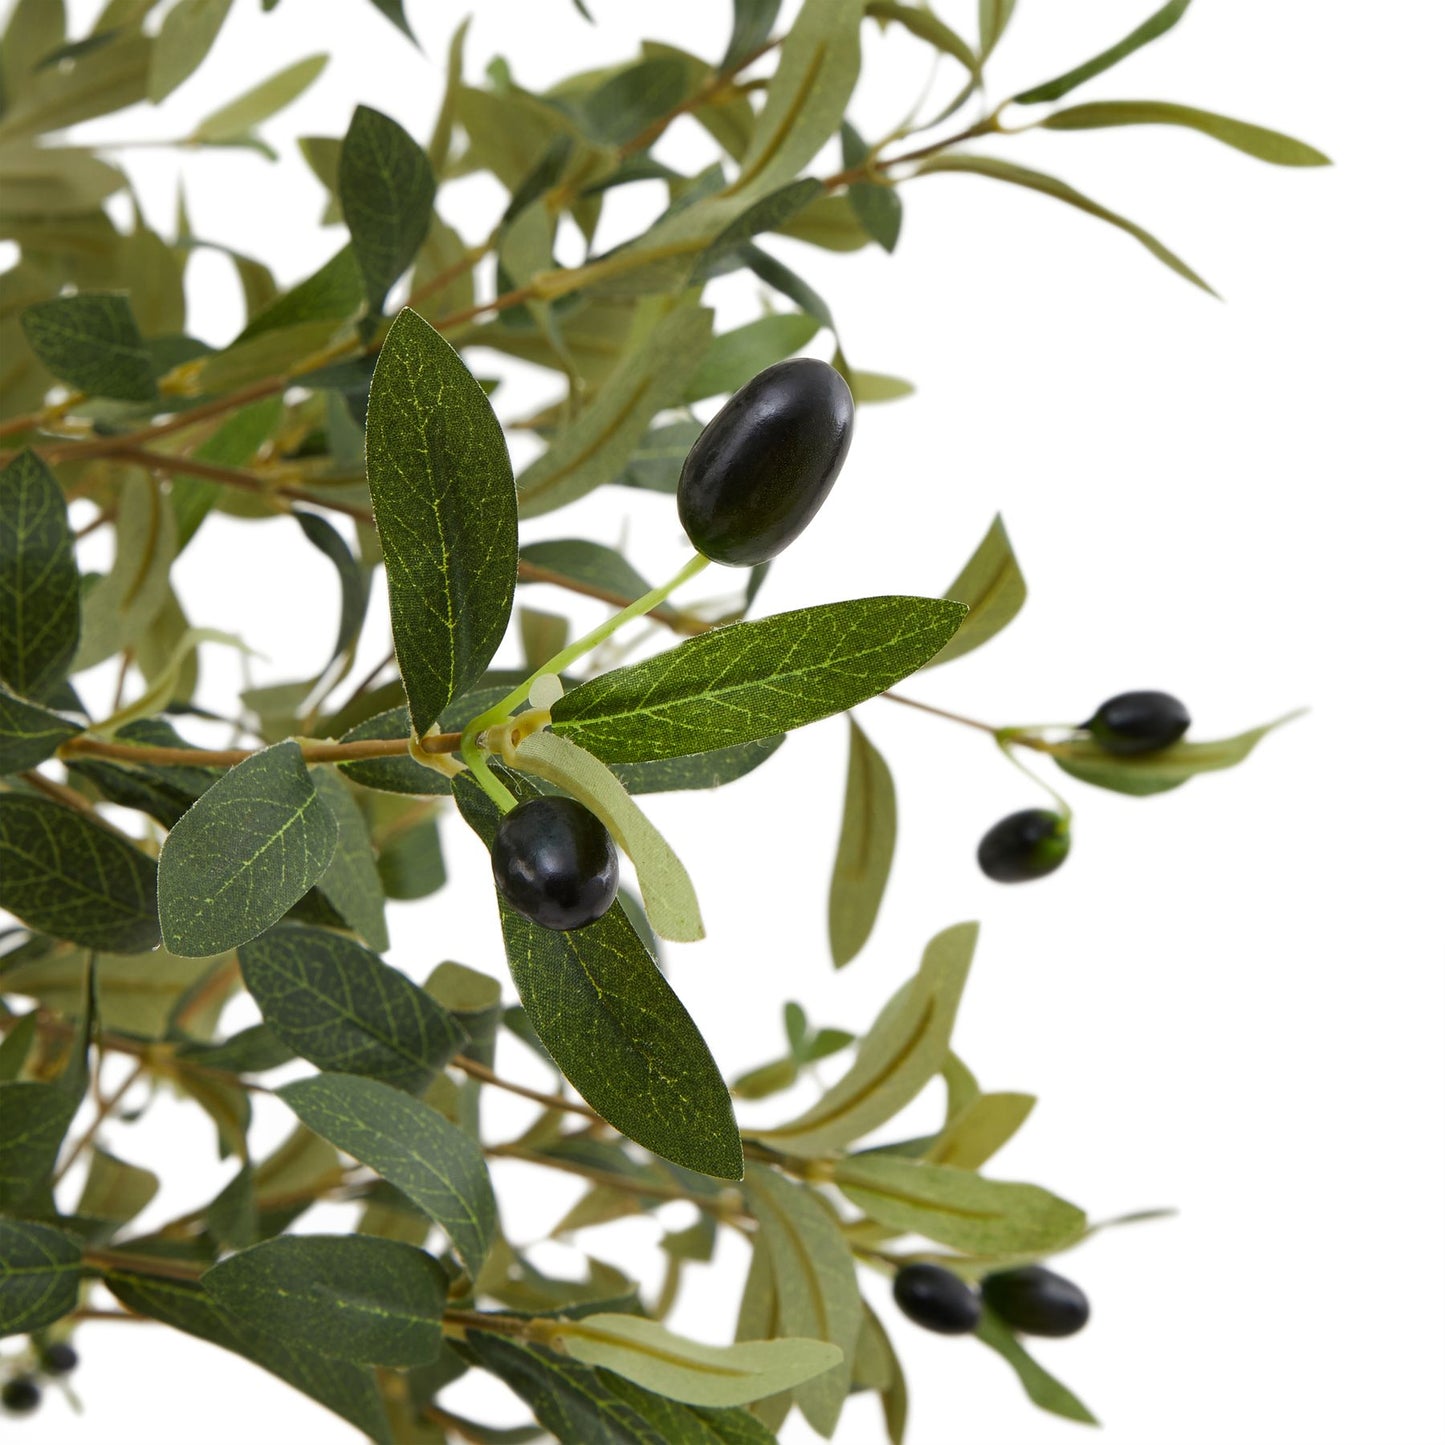 Small Faux Olive Tree